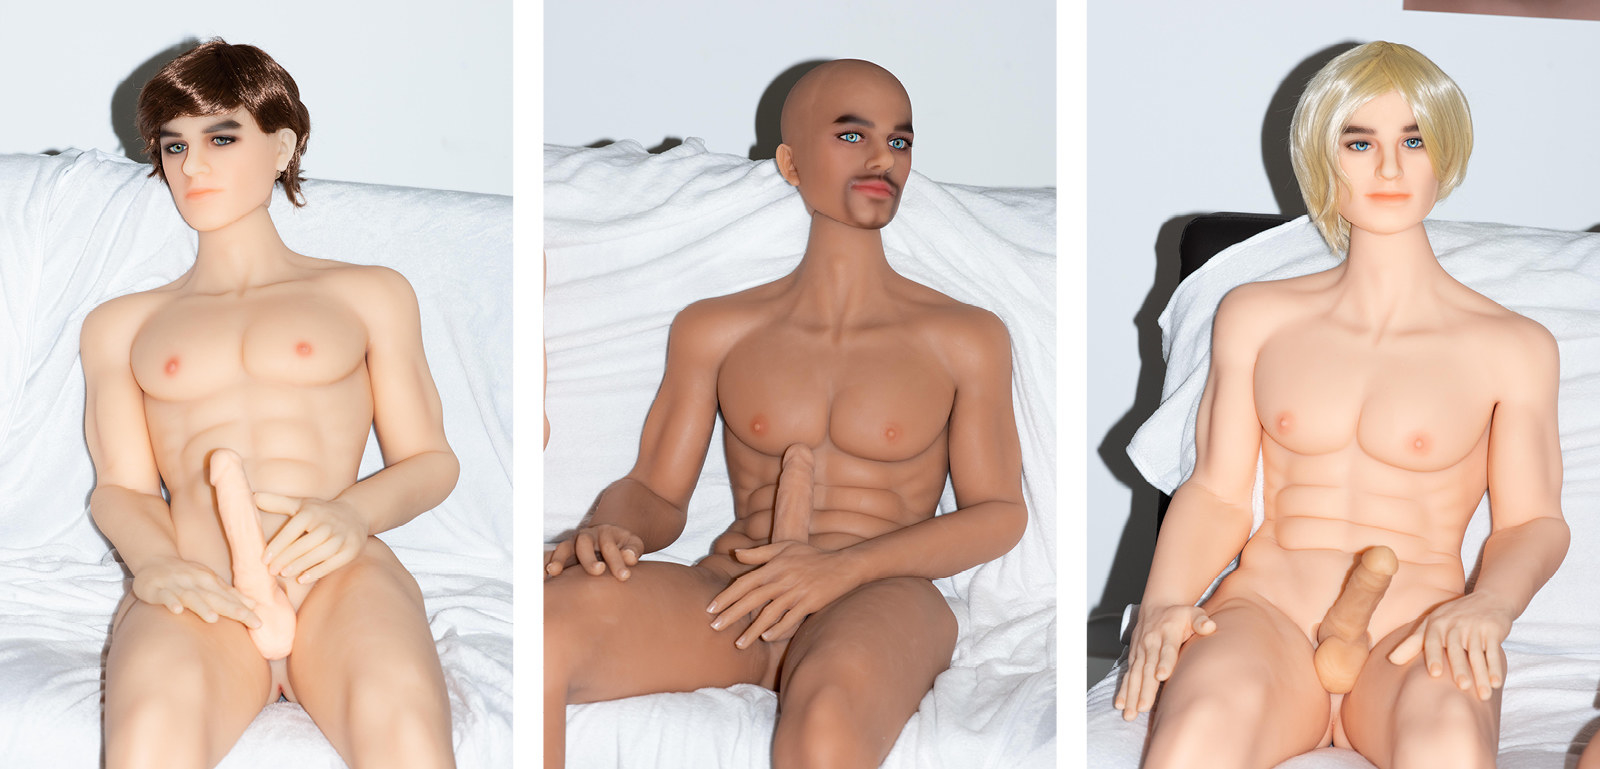 Male Sex Dolls Theyre Not Just For photo pic